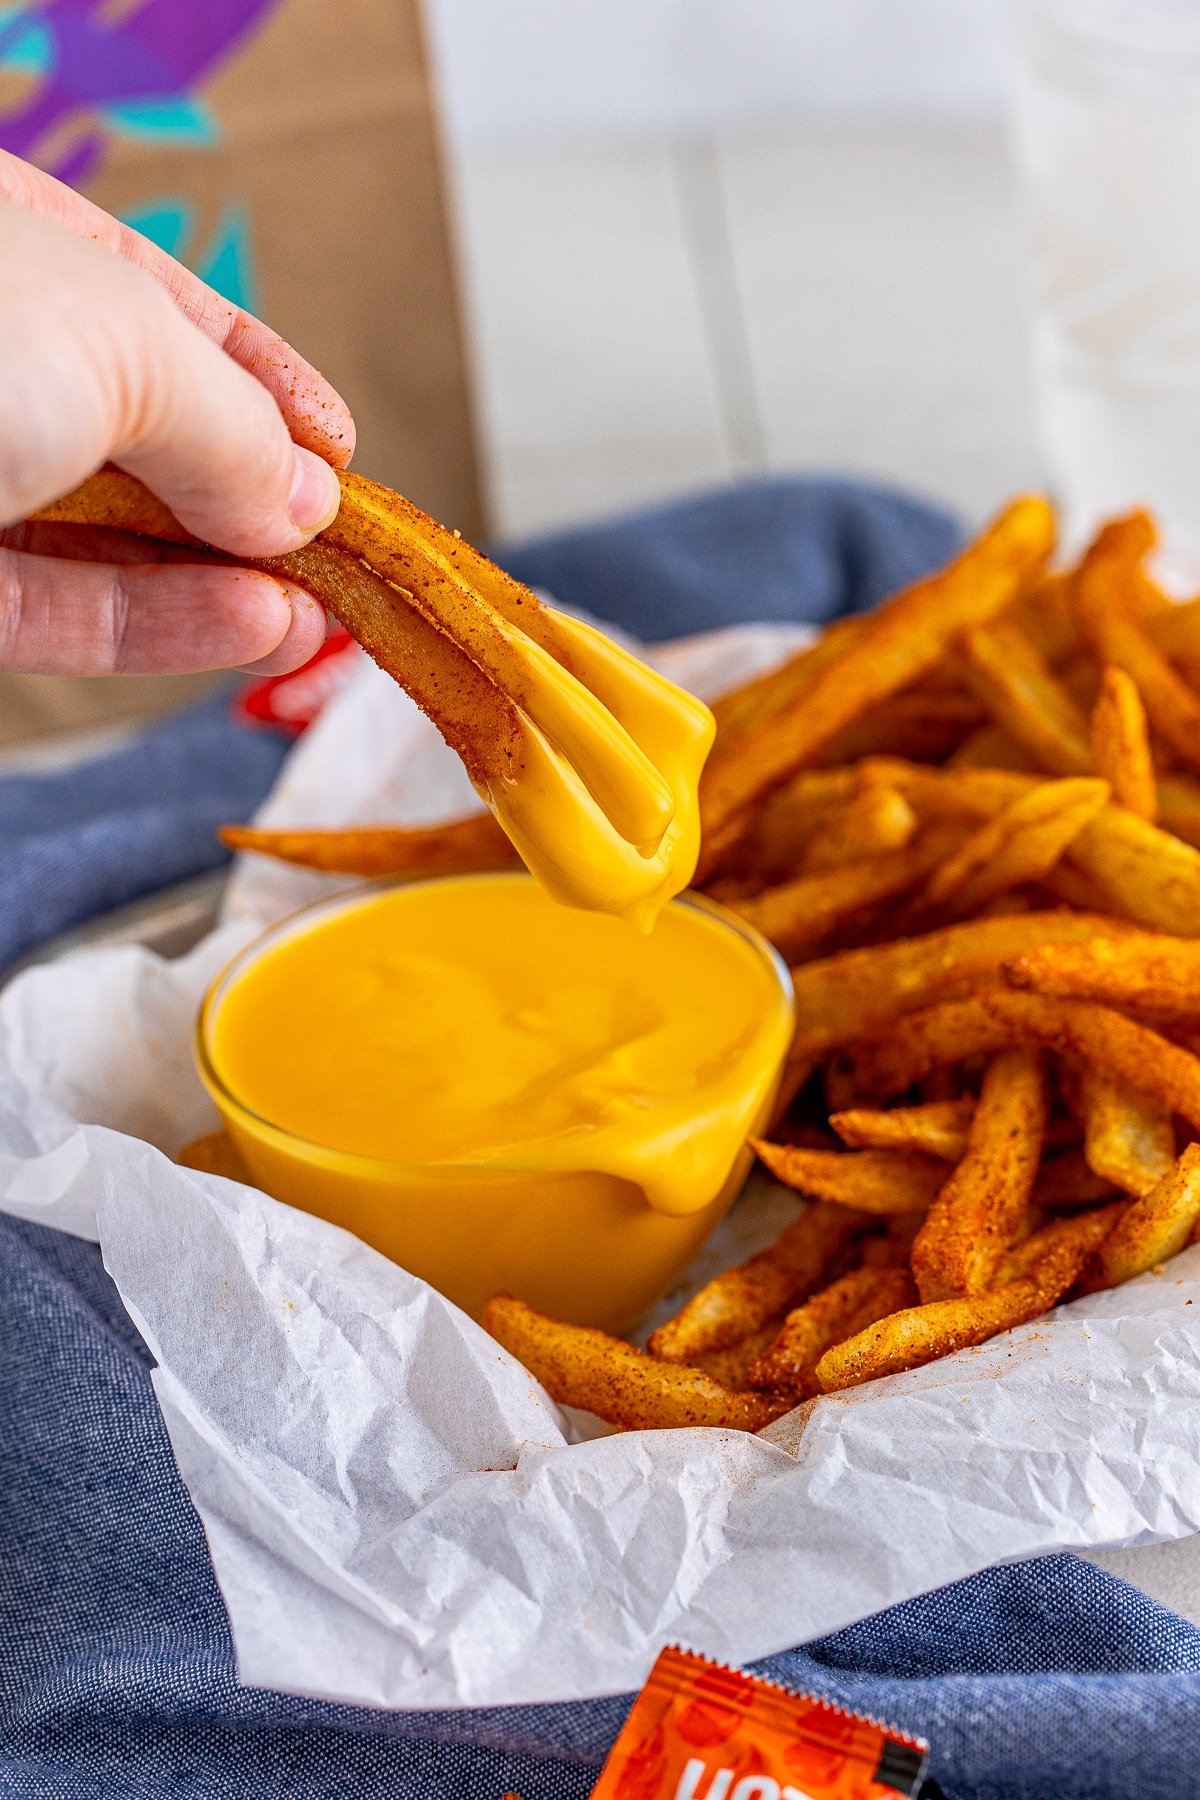 Dipped Nacho Fries Recipe shown being held in hand.